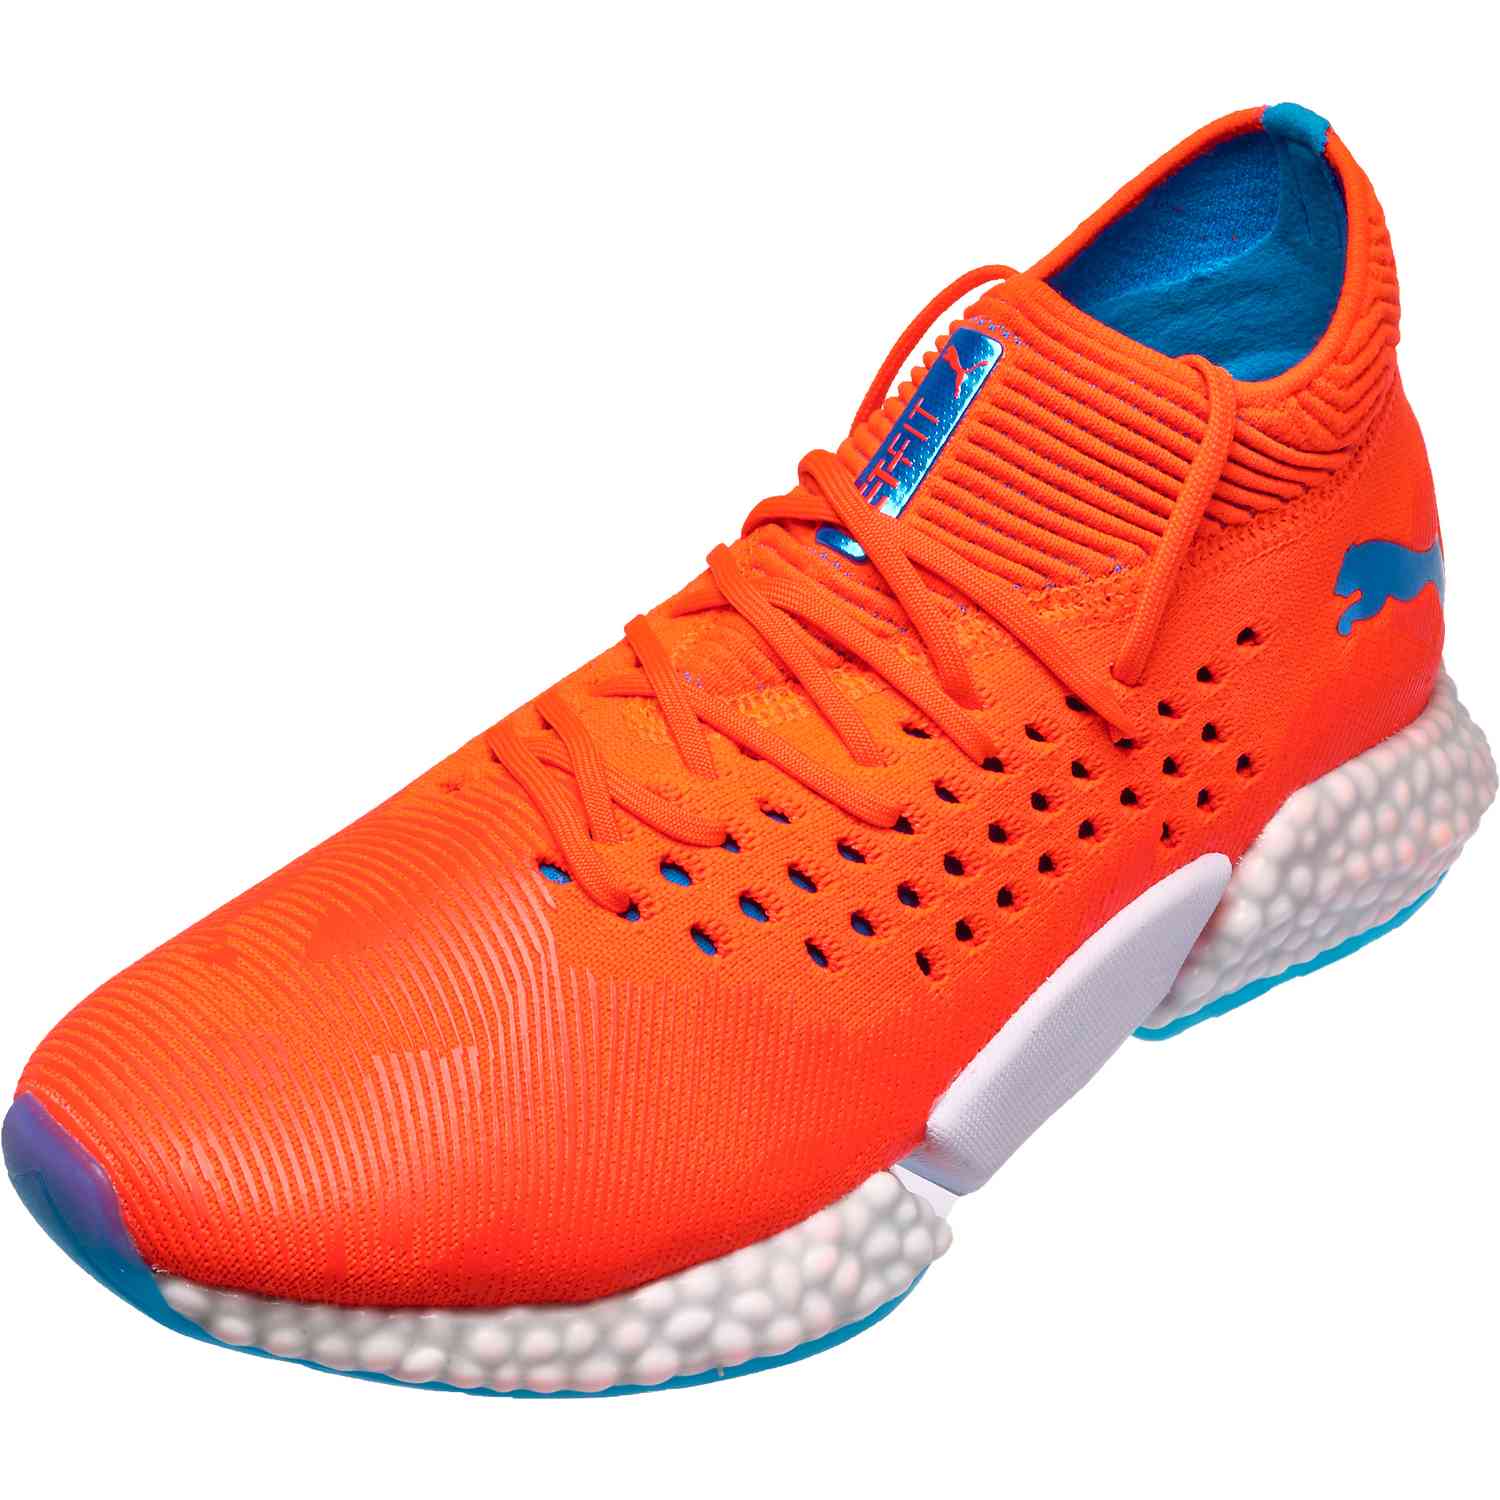 Buy Hybrid Rocket Runner Shoes: New Releases & Iconic Styles | GOAT